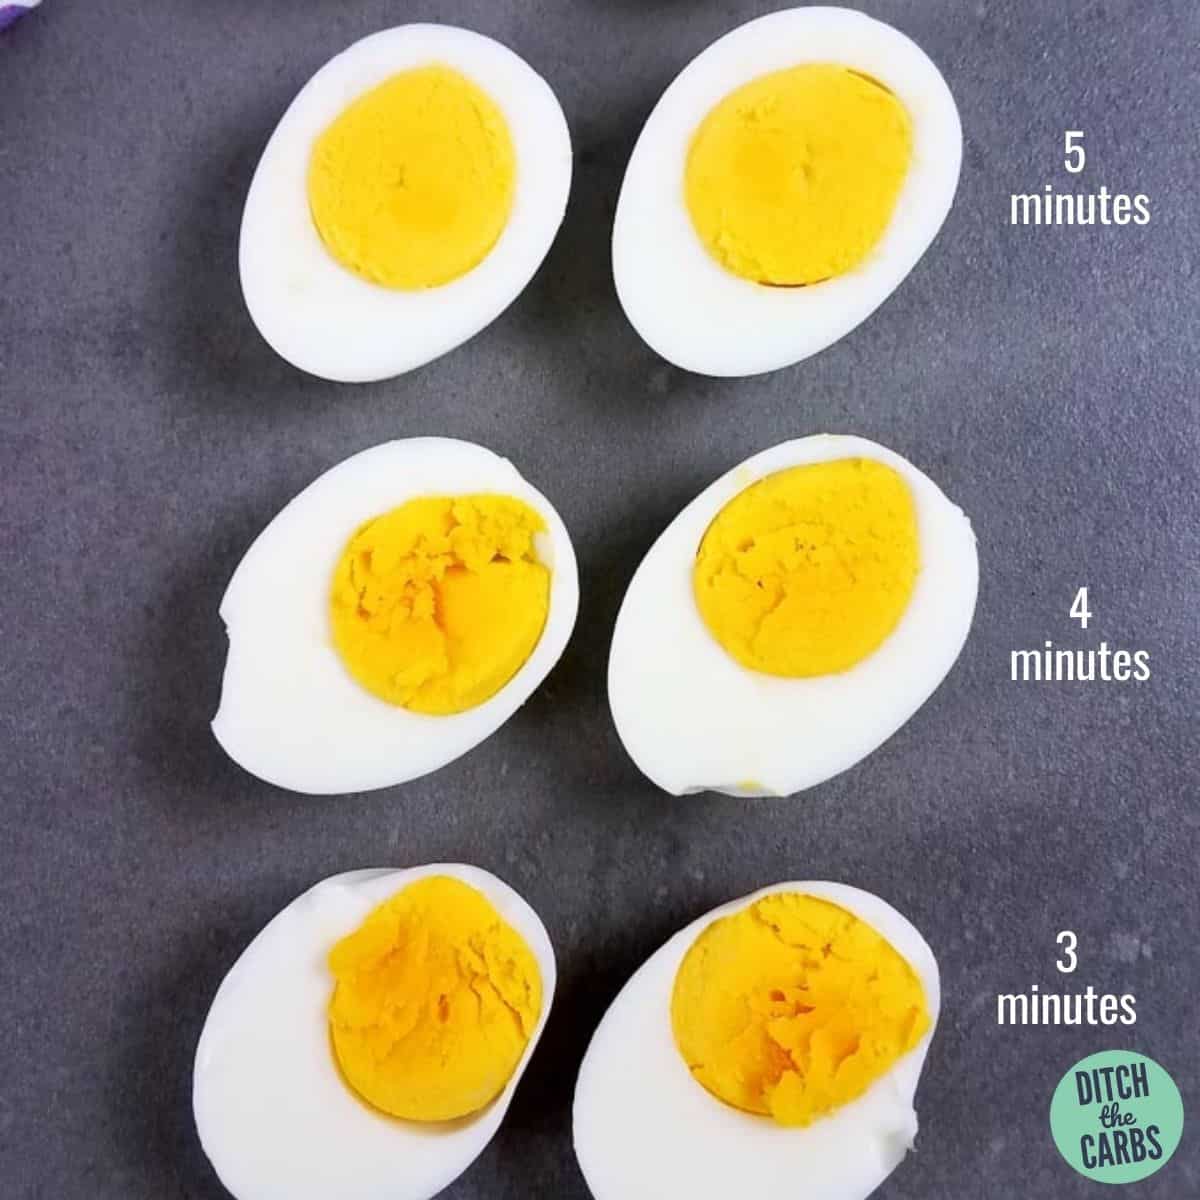 https://thinlicious.com/wp-content/uploads/2022/04/How-to-Boil-Eggs-in-an-Instant-Pot-1200-%C3%97-1200-px.jpg